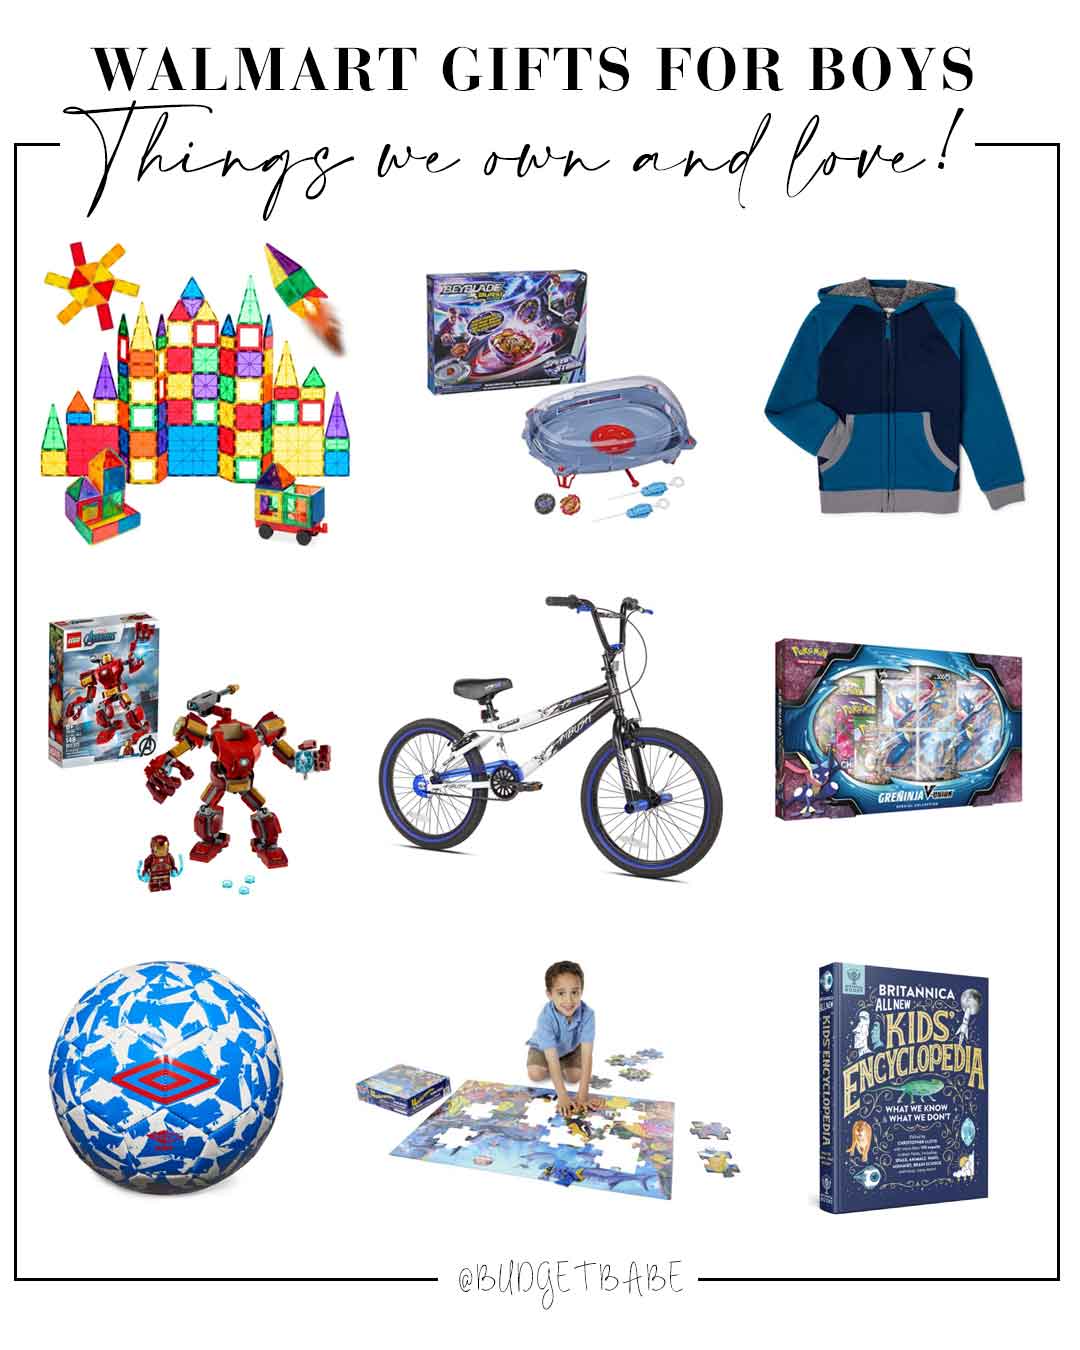 Amazon gift guide for guys, men, fathers, husbands, boyfriends, brothers, holiday edition